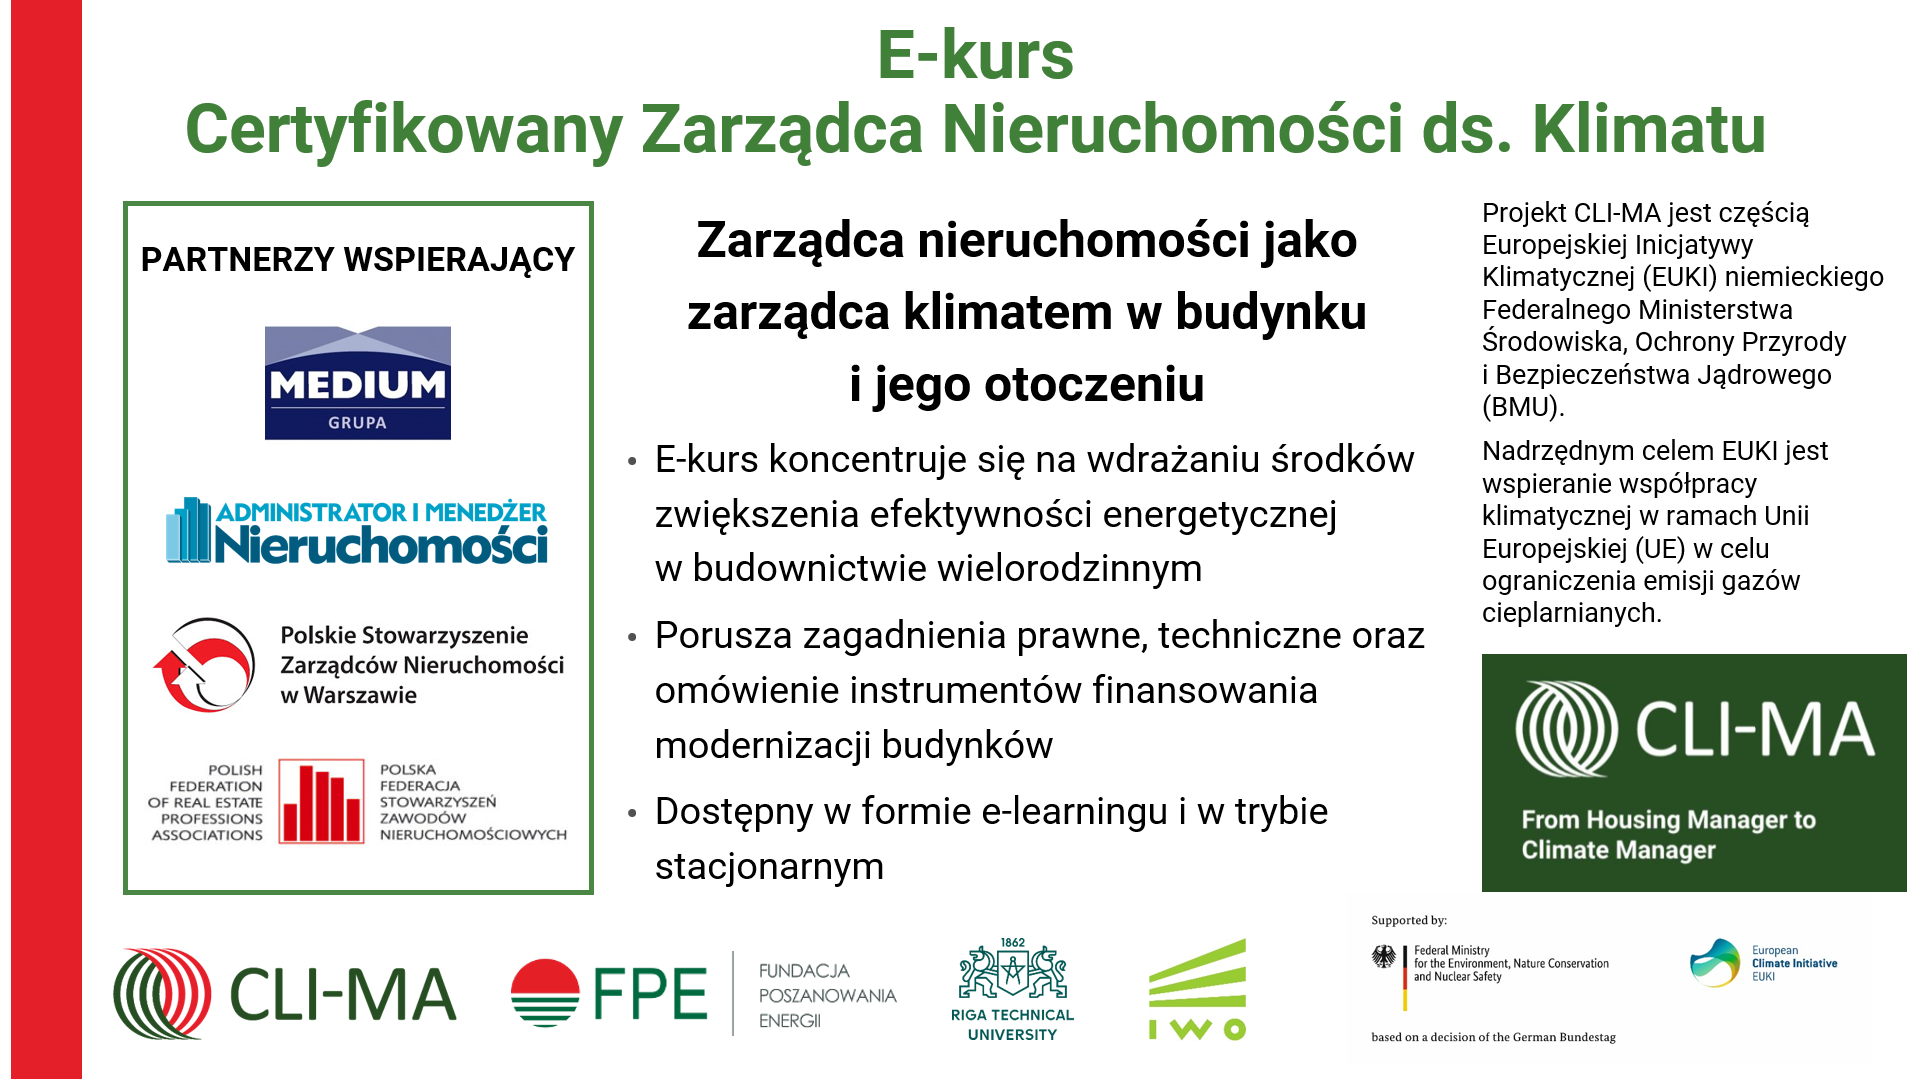 Information Event on the training programmes “Climate Housing Manager” in Poland and Latvia